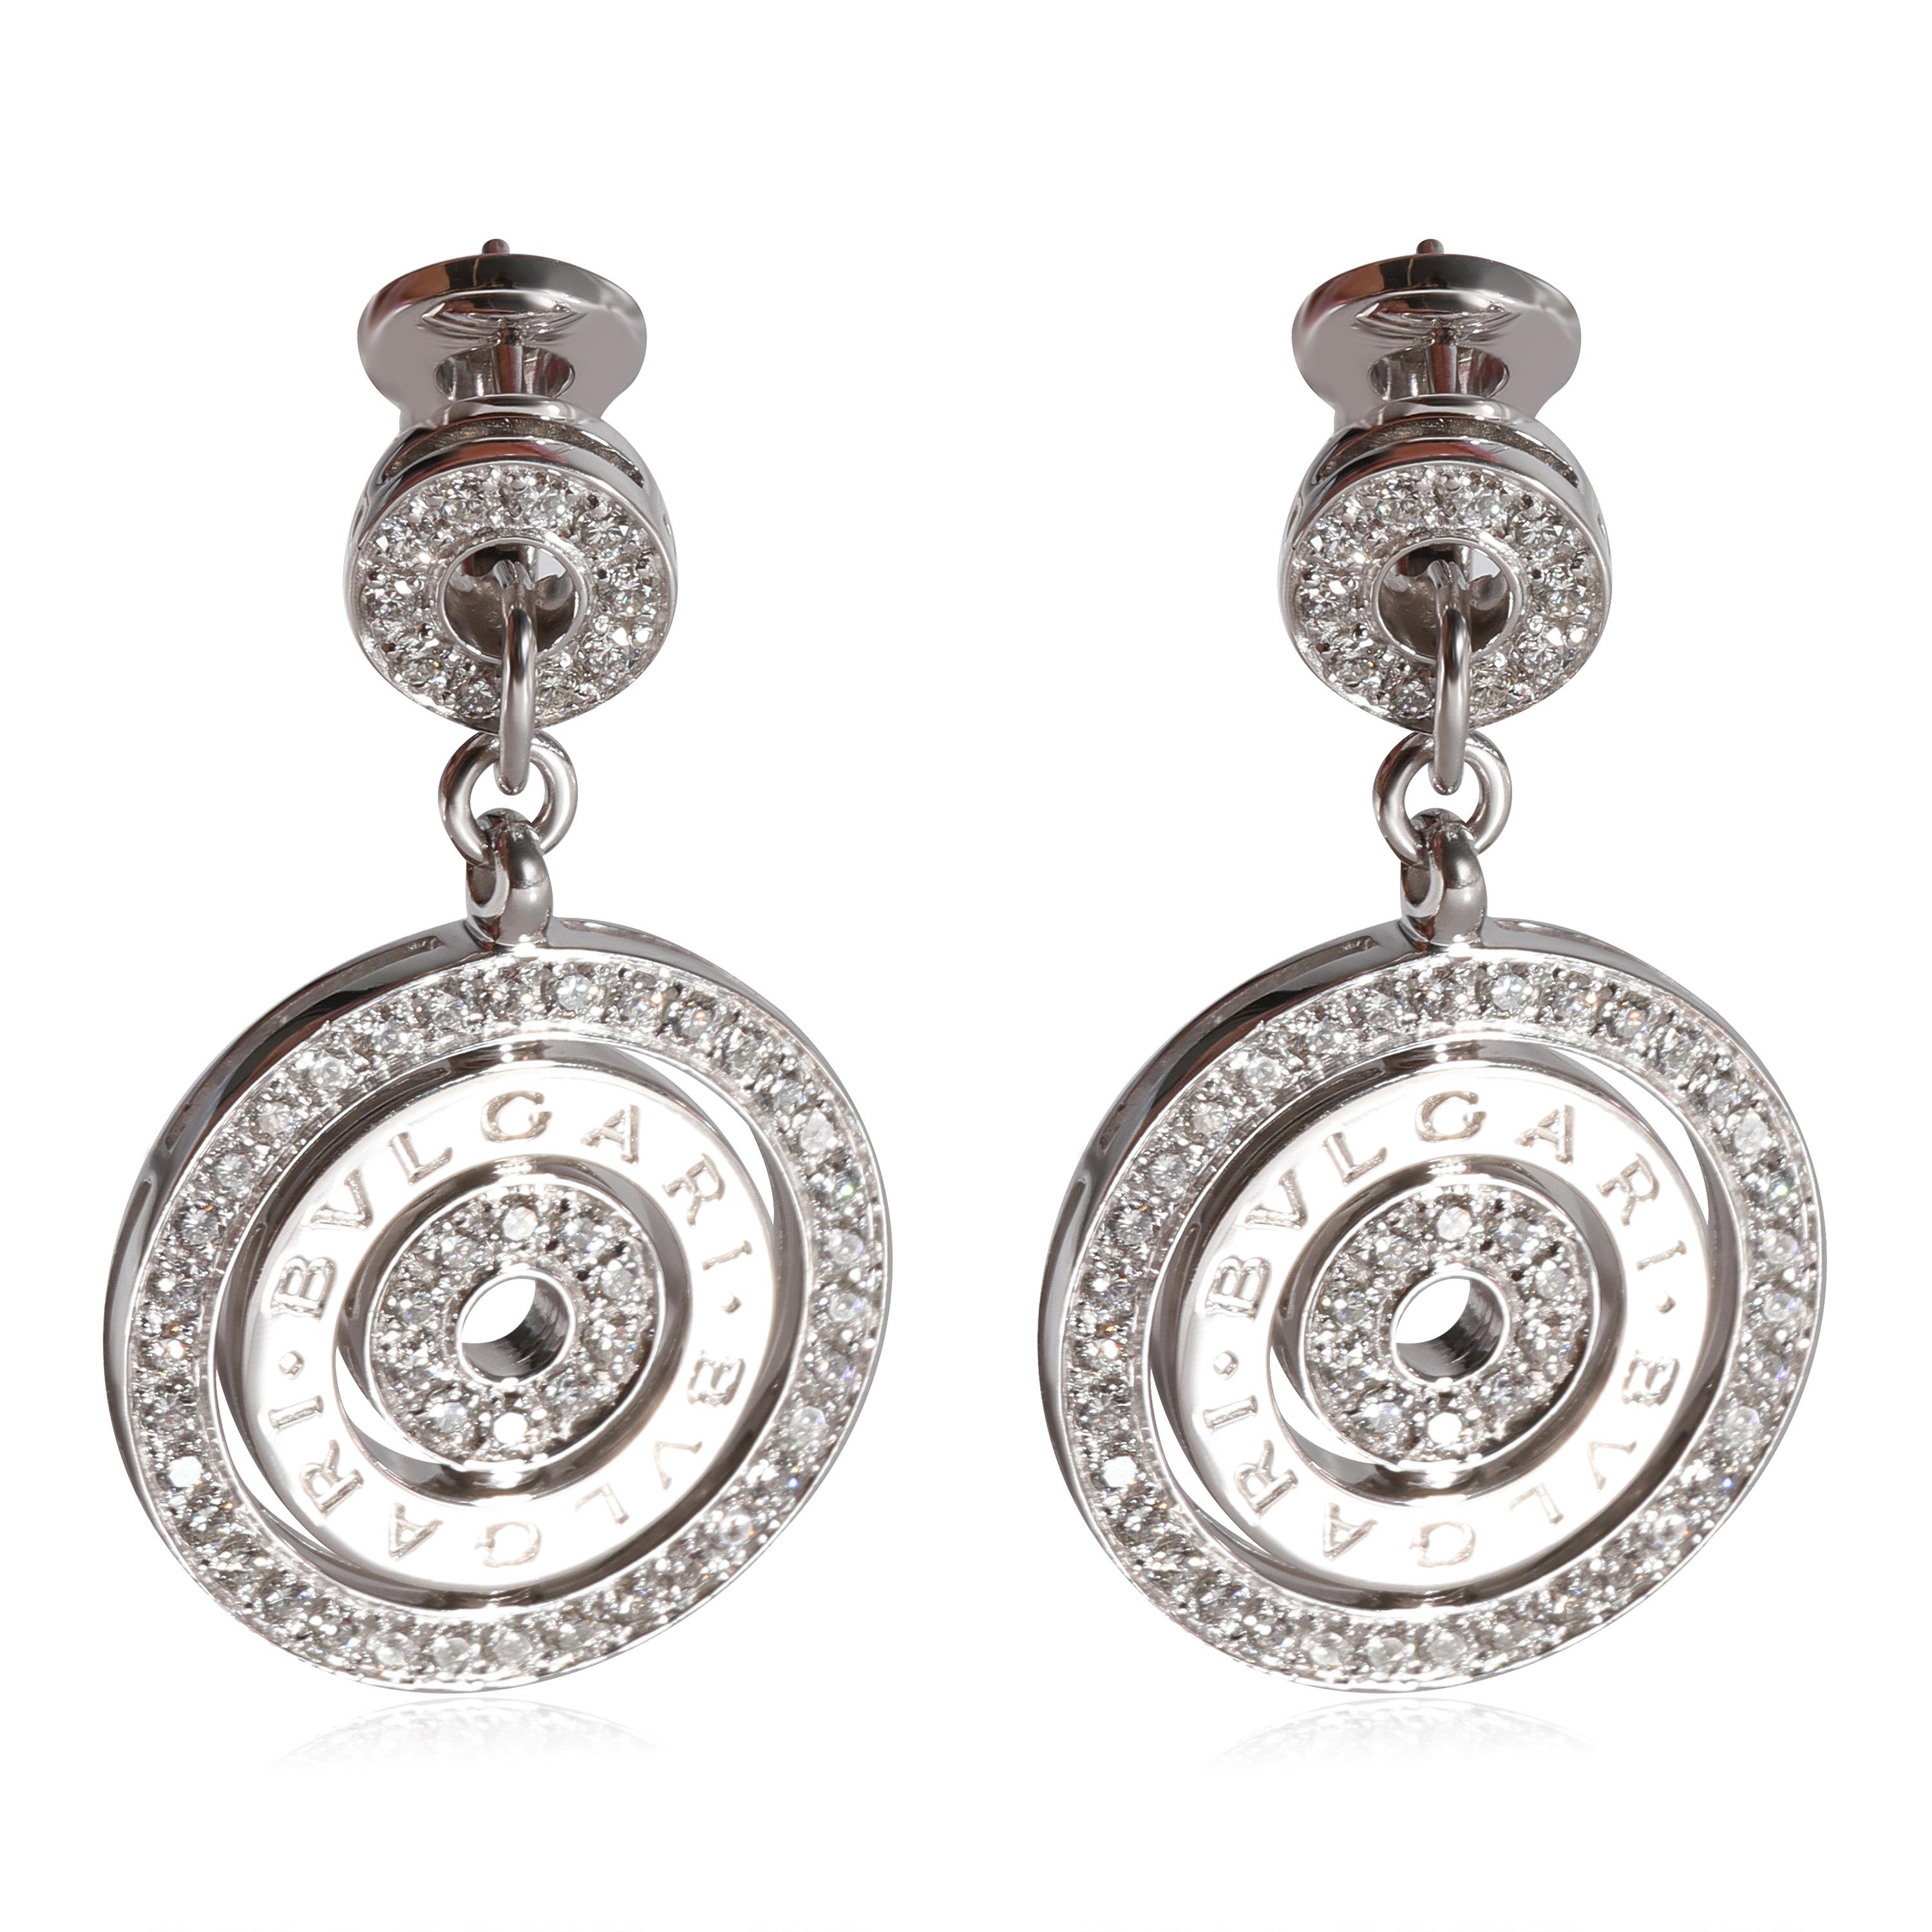 BVLGARI Astrale Diamond Earrings in 18k White Gold 1.3 CTW

PRIMARY DETAILS
SKU: 122414
Listing Title: BVLGARI Astrale Diamond Earrings in 18k White Gold 1.3 CTW
Condition Description: Retails for 15000 USD. In excellent condition and recently